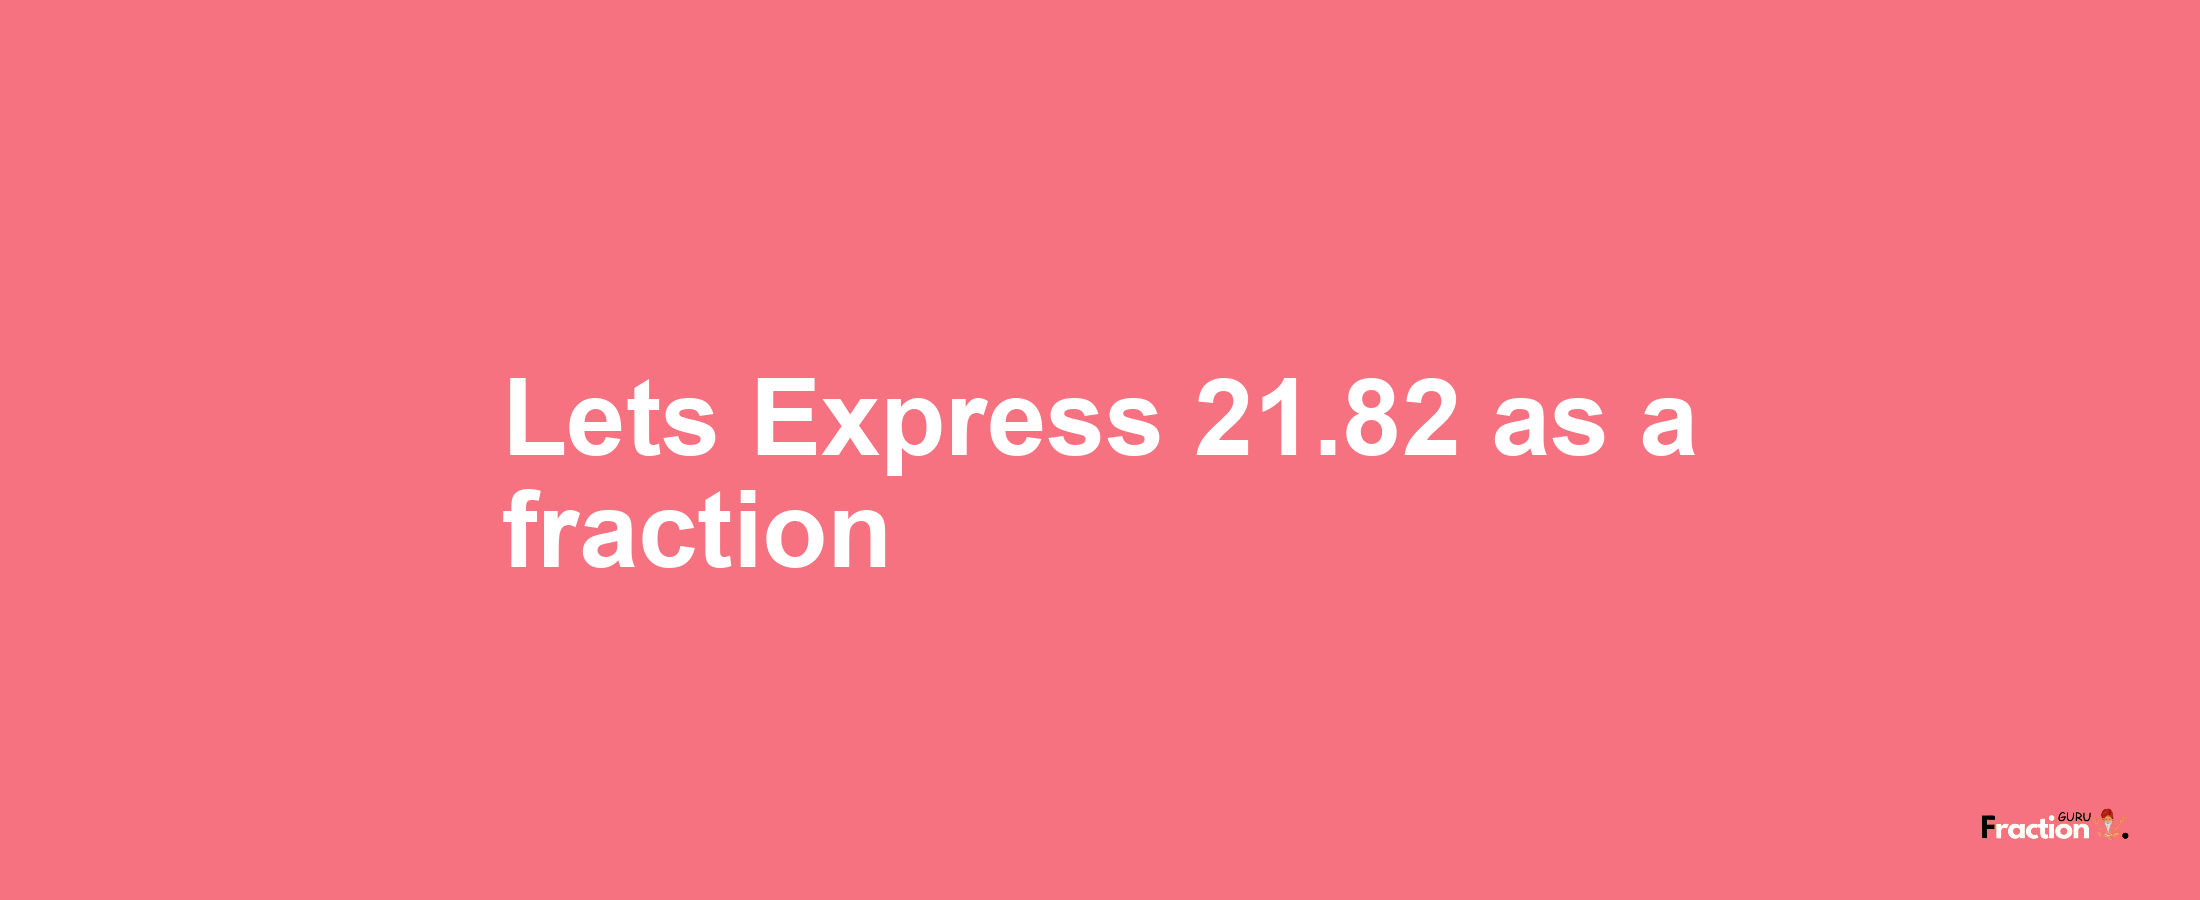 Lets Express 21.82 as afraction